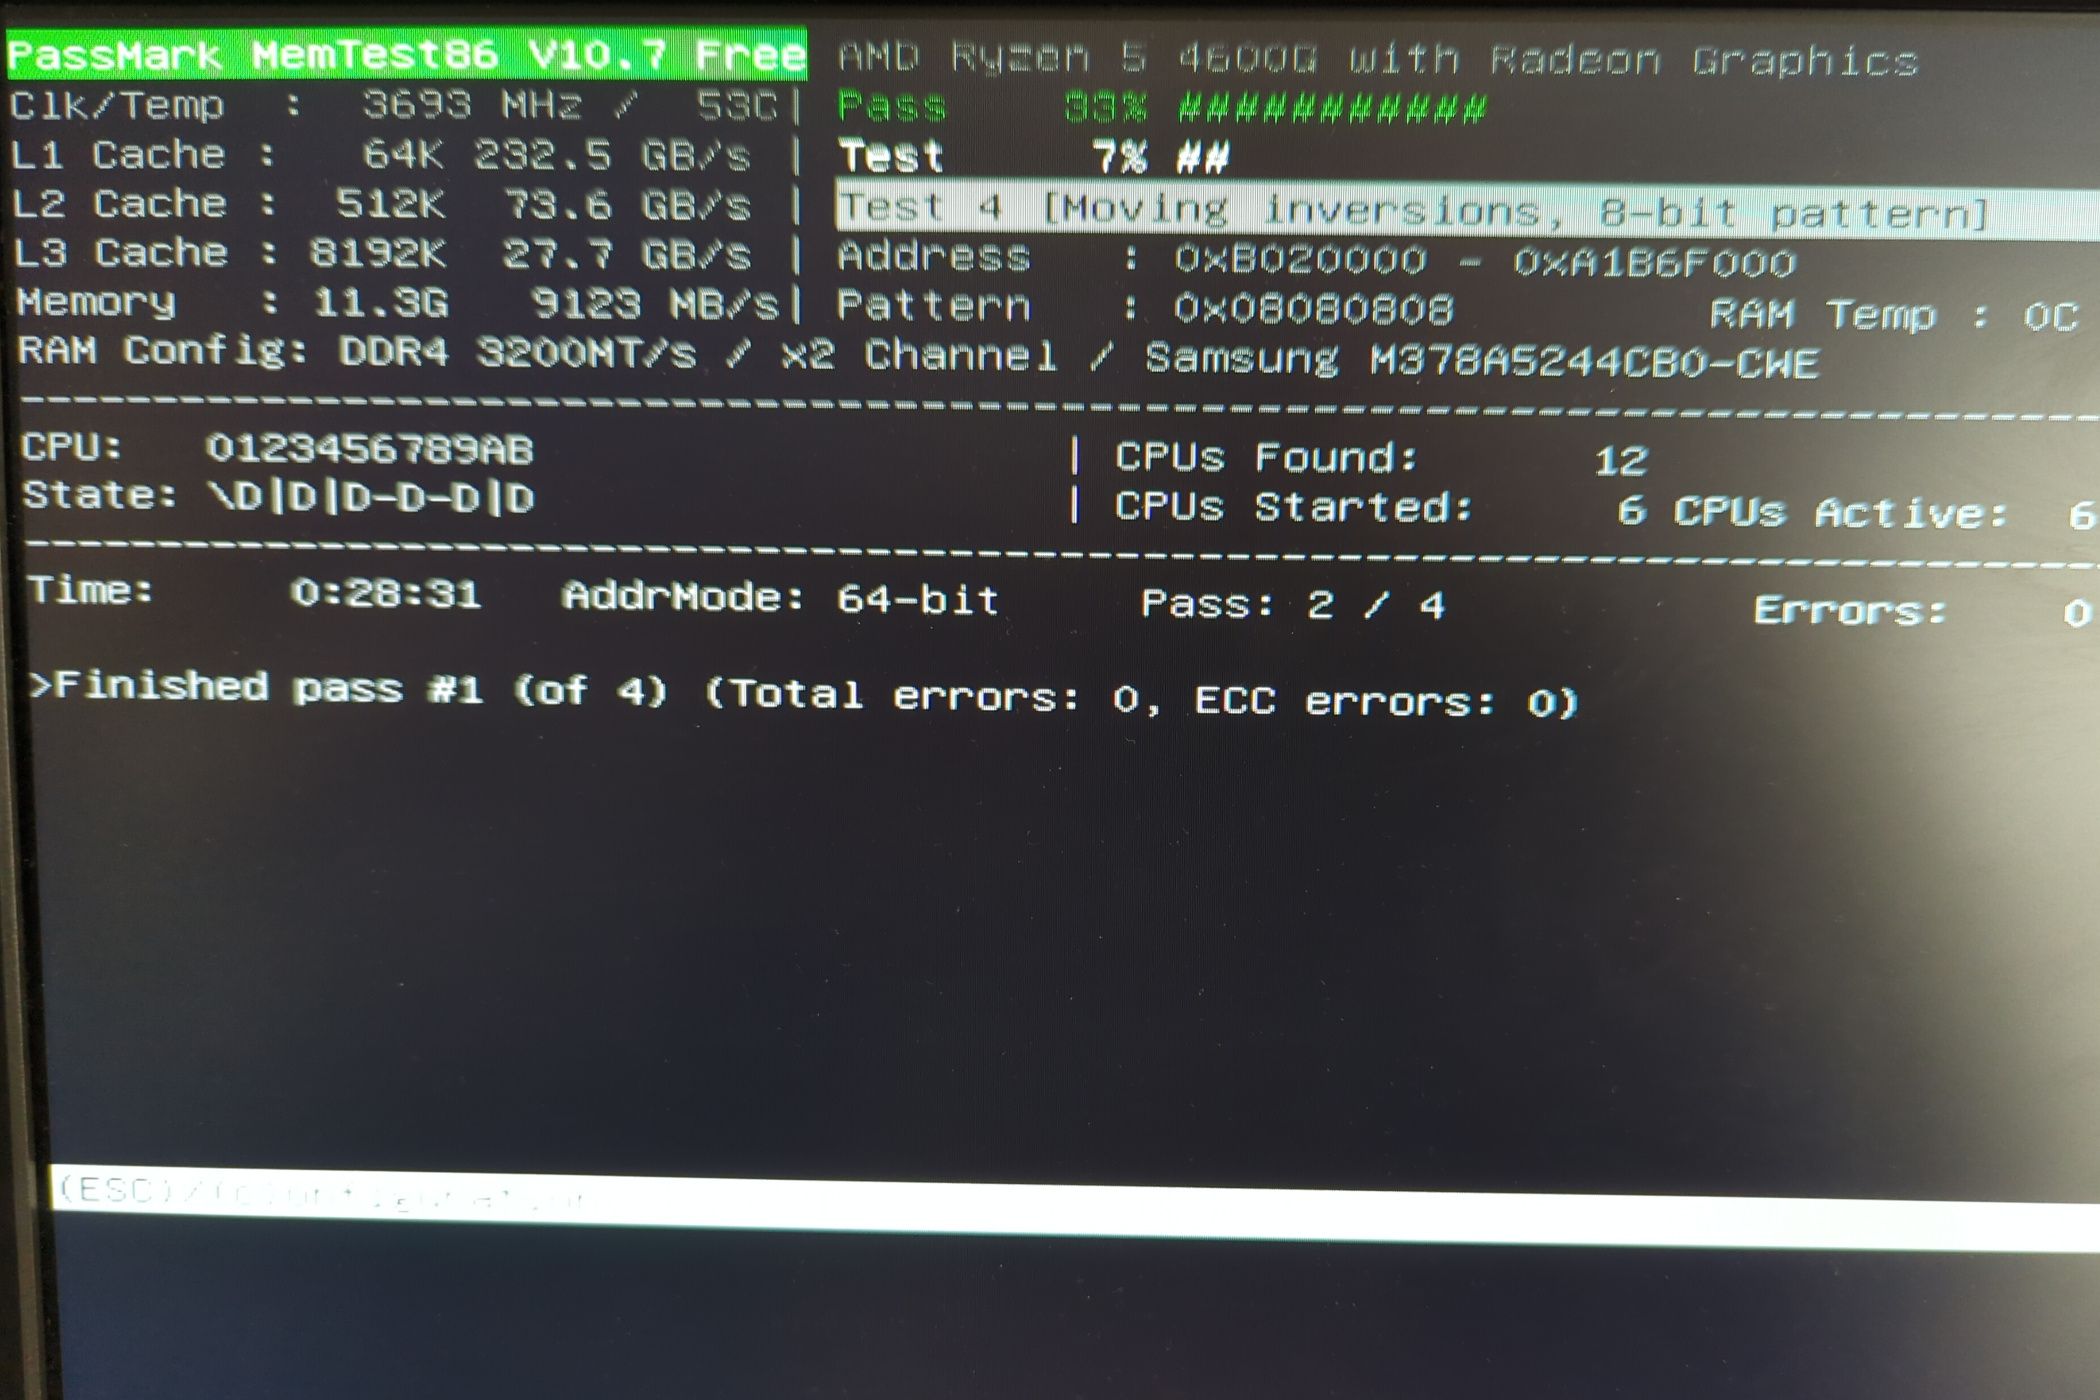 MemTest86 running a memory check on a computer monitor.